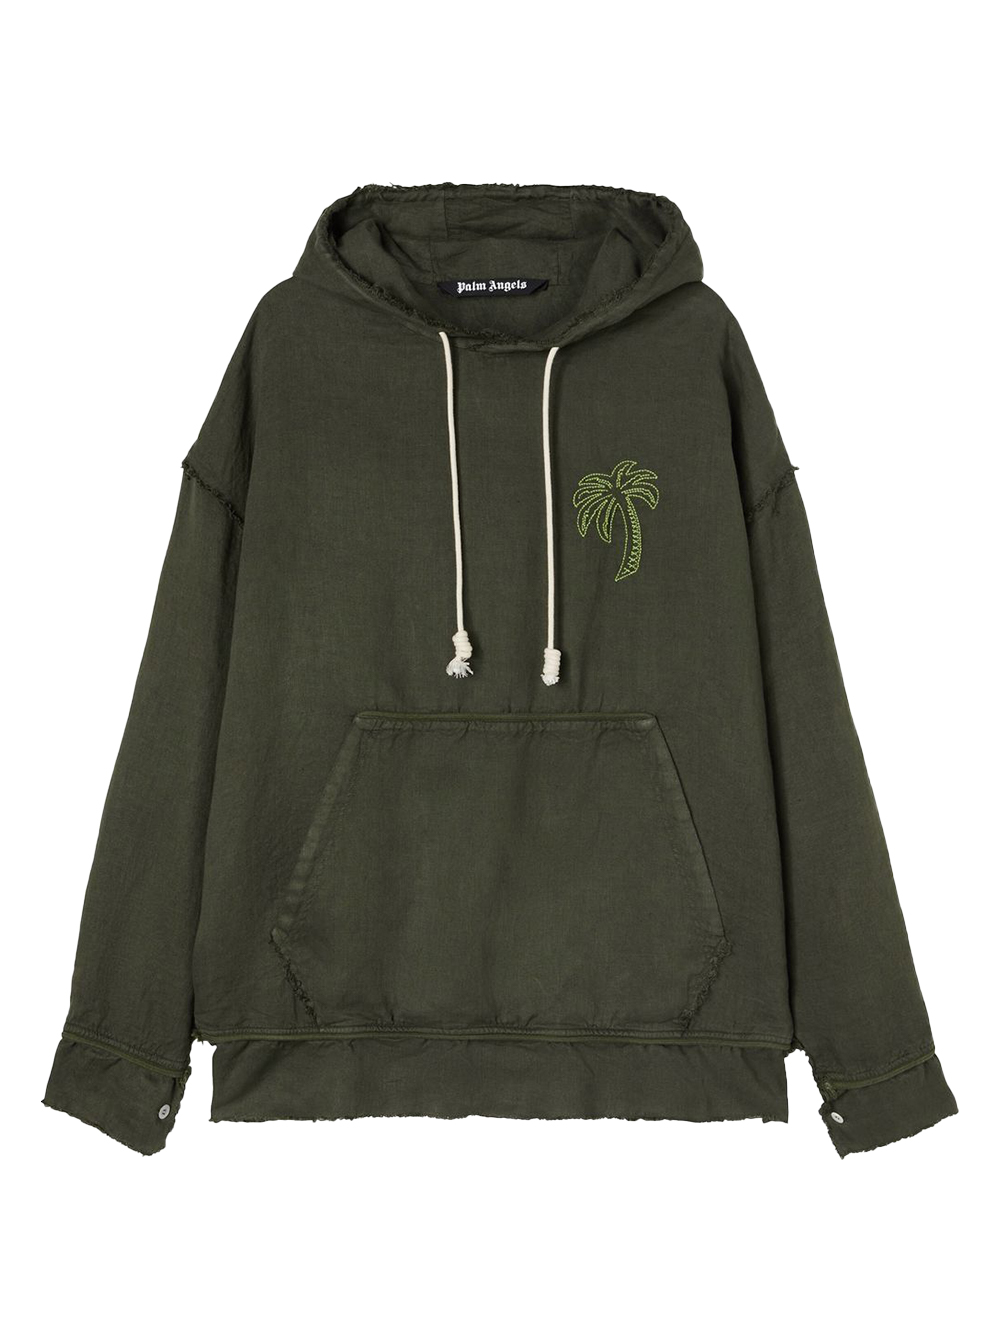 Palm Angels Embroidered Palm Tree Hoodie Military/Lime Green